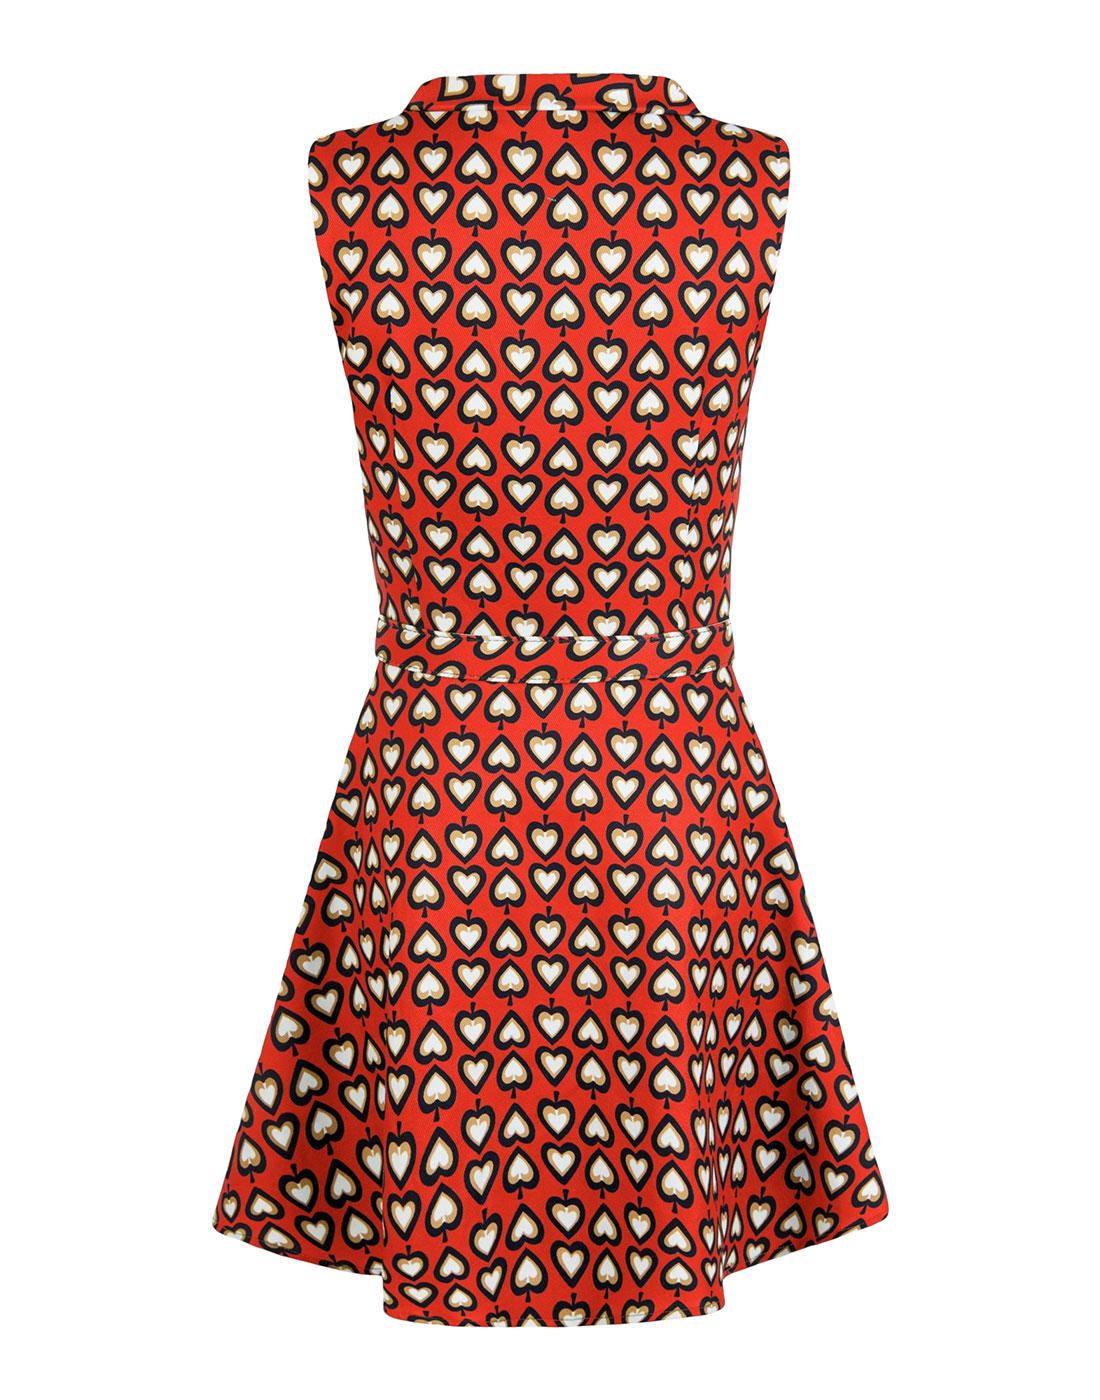 BRIGHT & BEAUTIFUL Ruth Heart Print Flared Dress in Red/White